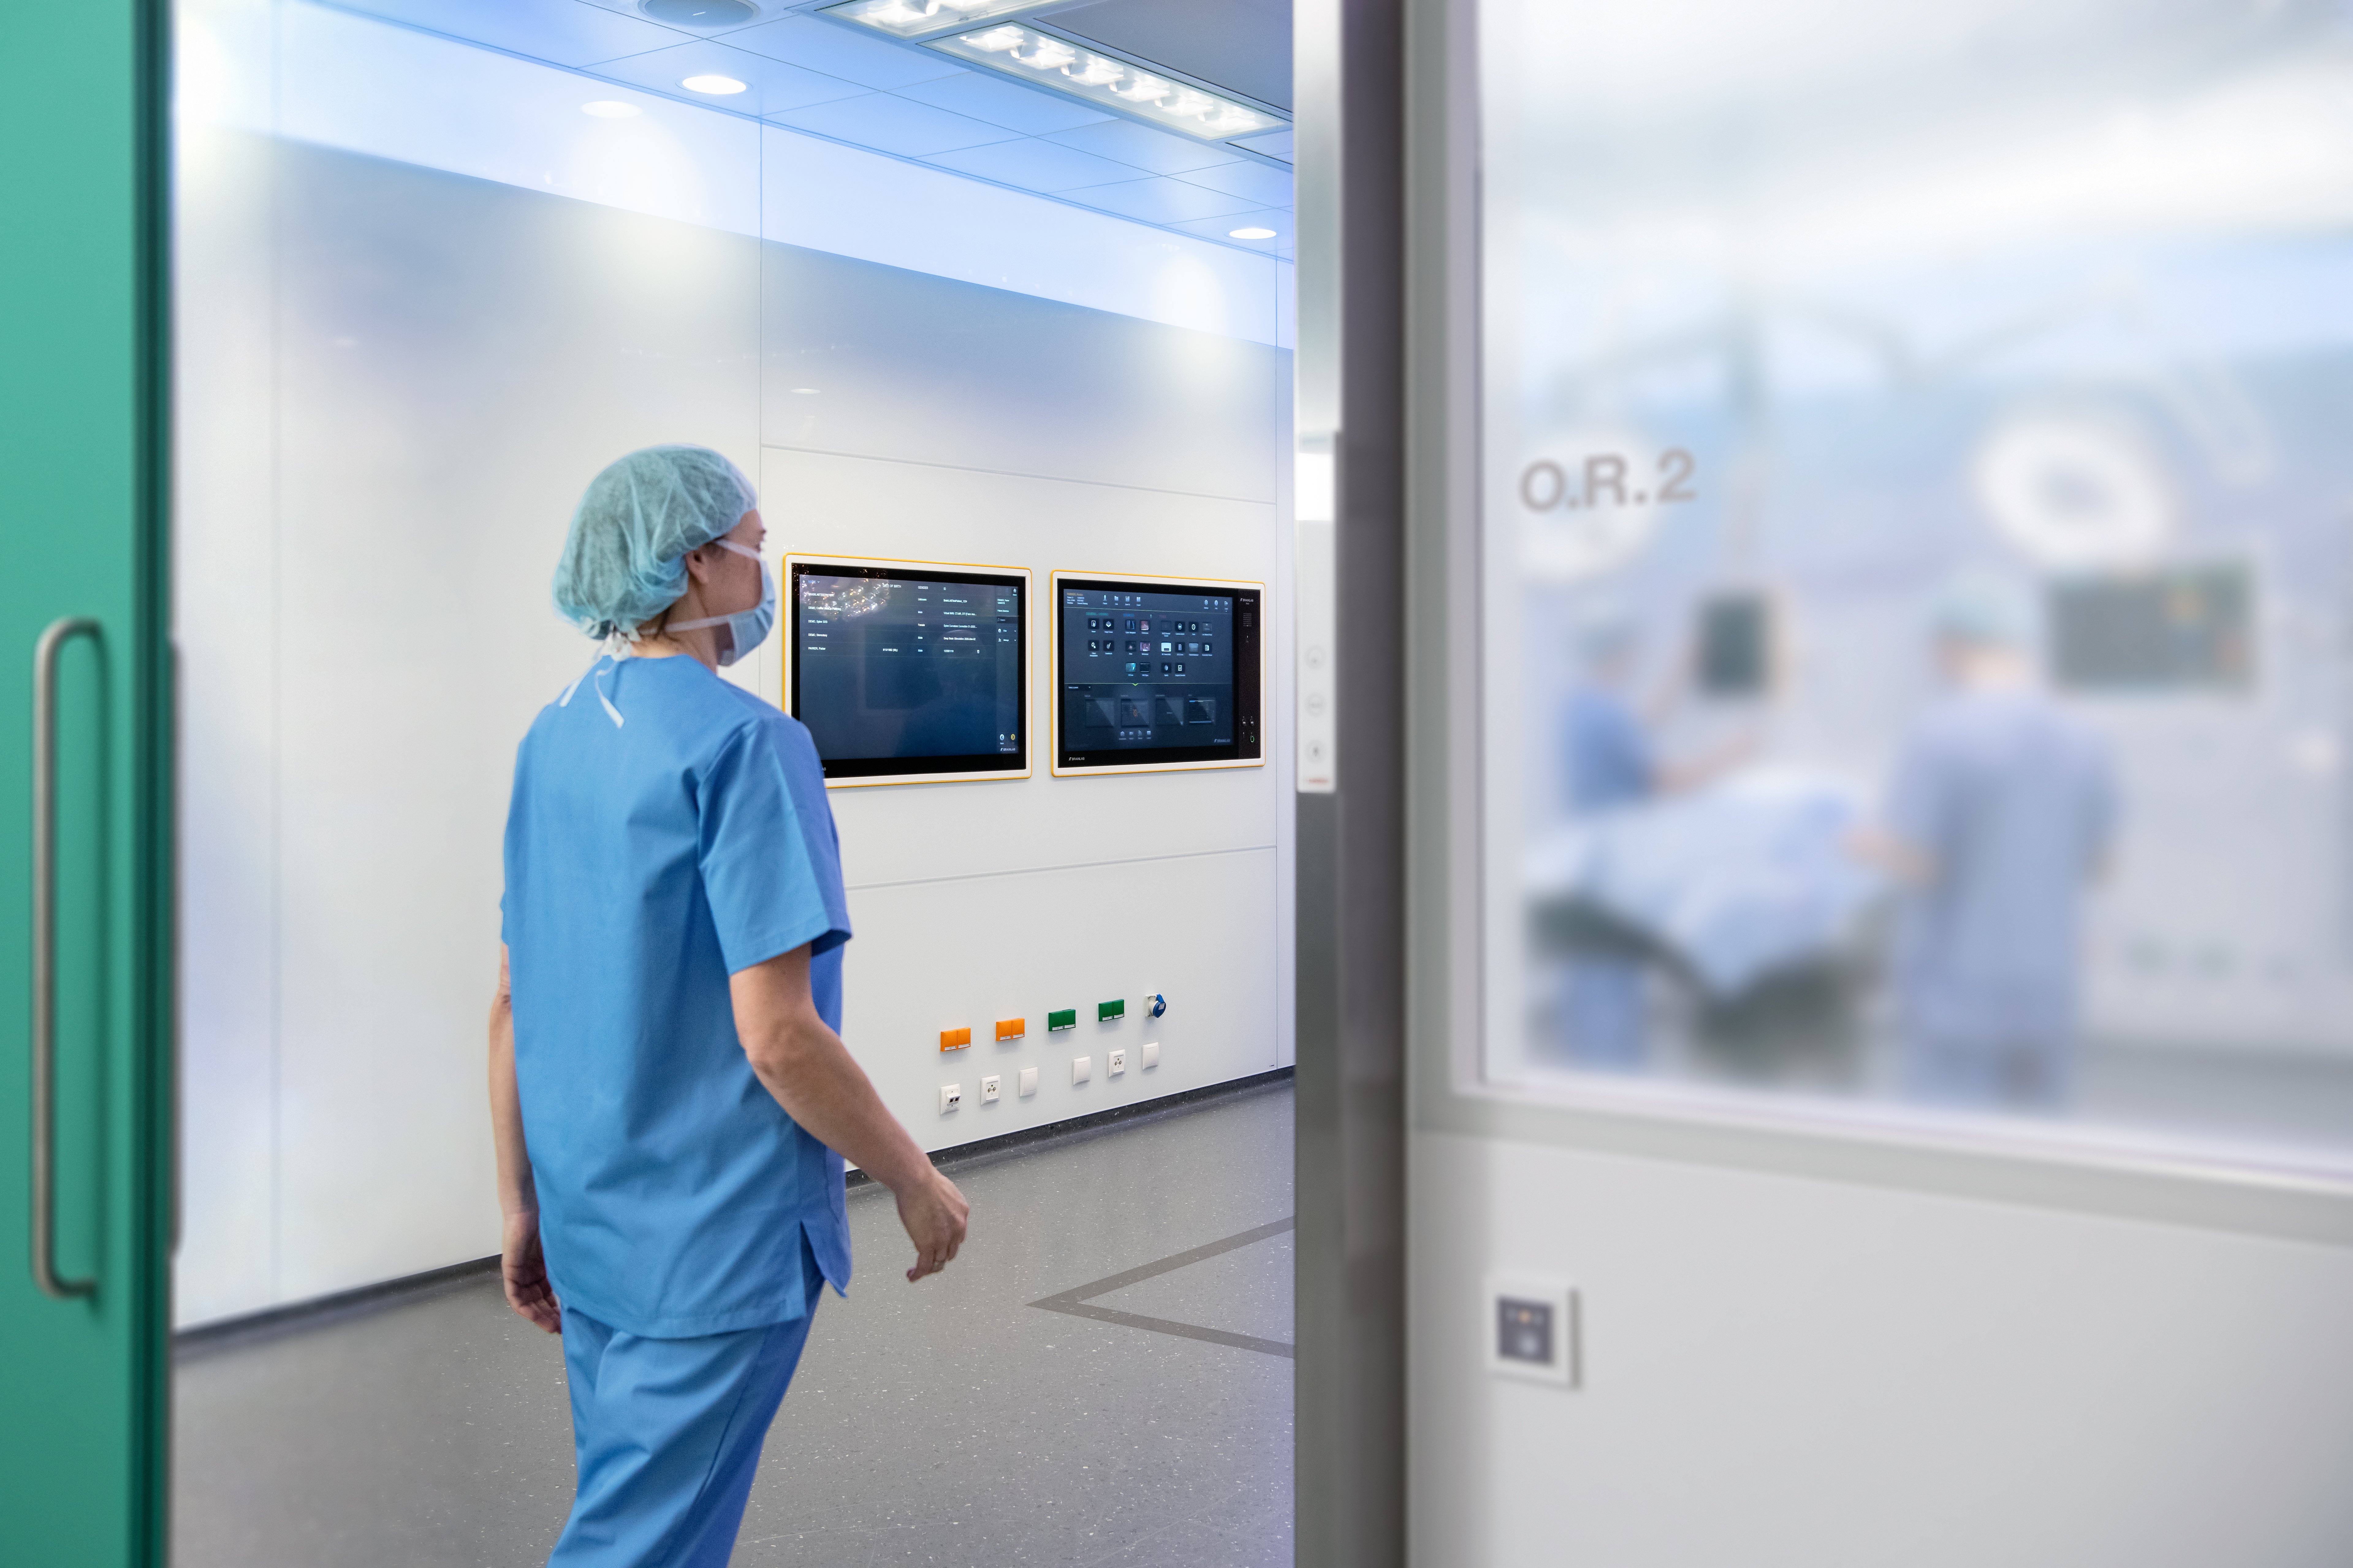 Buzz installed in an operating room is pictured in the background while a surgeon is entering the O.R.